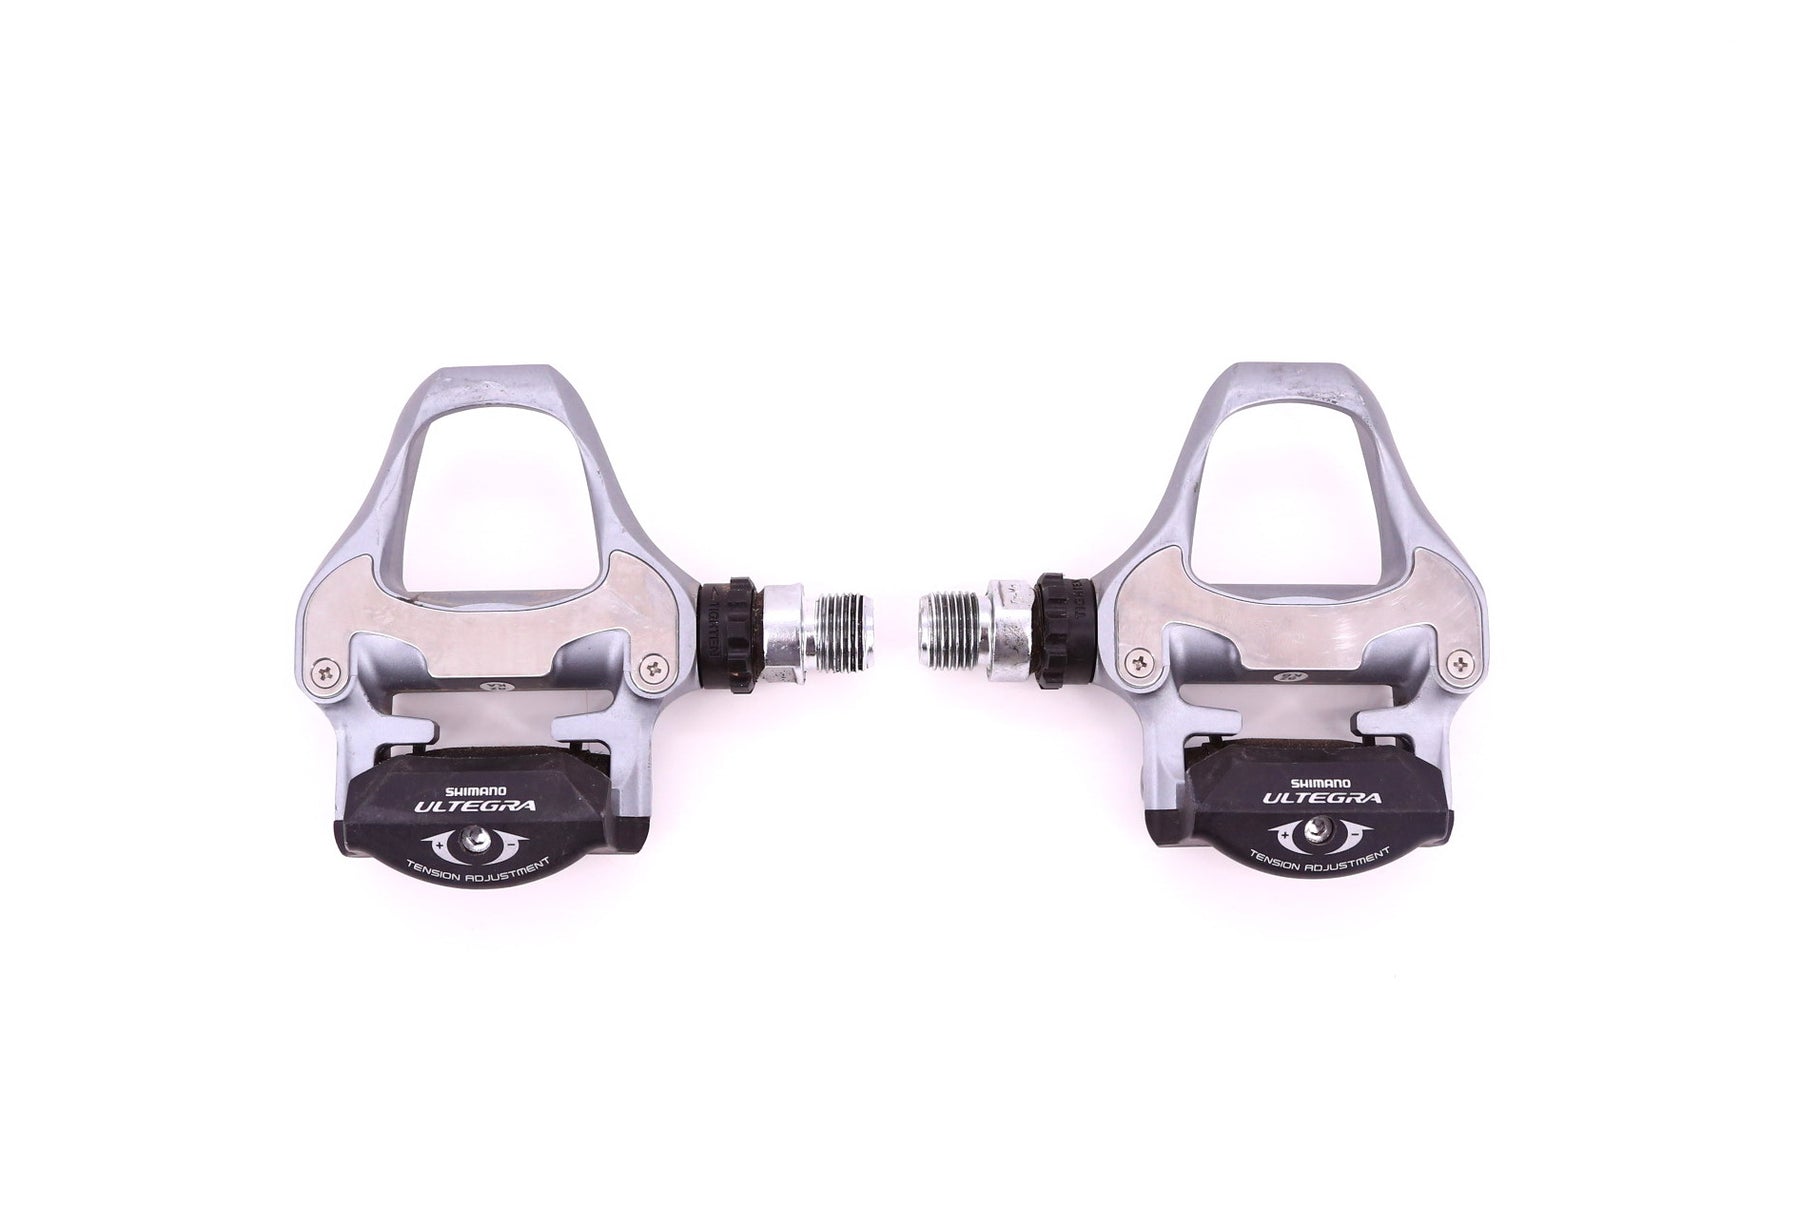 shimano pd 6700 pedals